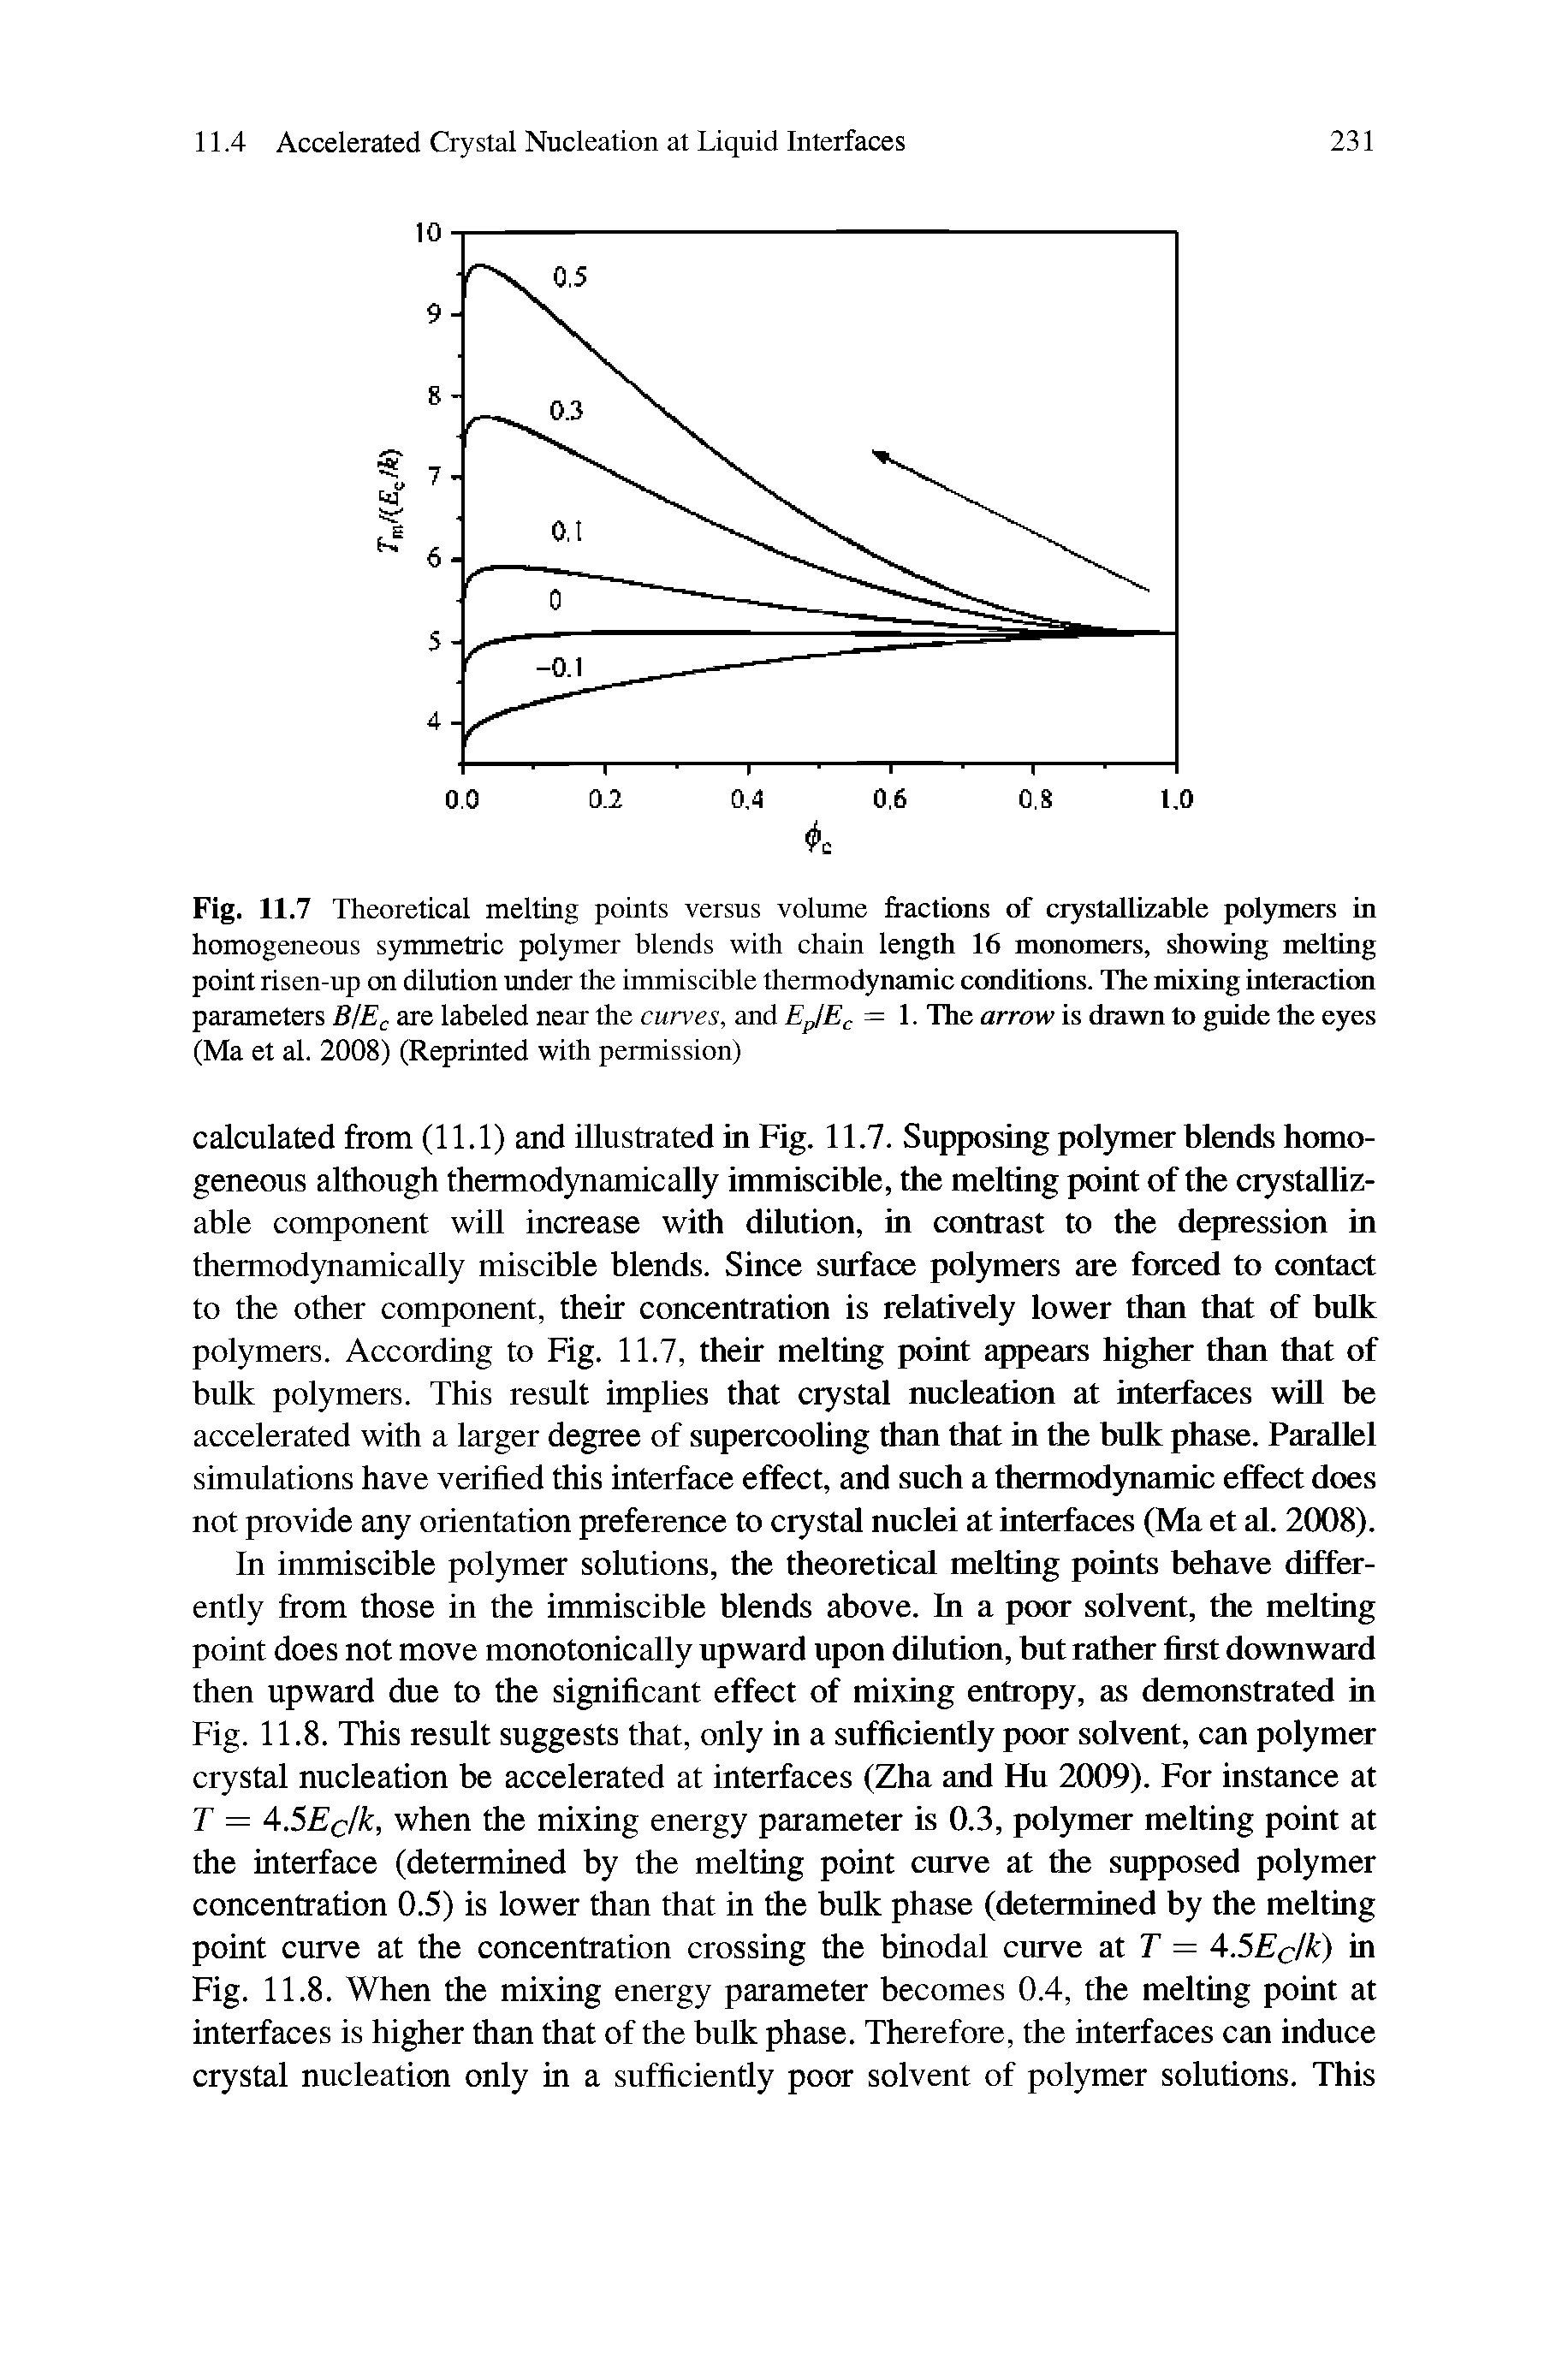 Fig. 11.7 Theoretical melting points versus volume fractions of crystallizable polymers in homogeneous symmetric polymer blends with chain length 16 monomers, showing melting point risen-up on dilution under the immiscible thermodynamic ctmditions. The mixing inteiactimi parameters BjEc are labeled near the curves, and EpjEc = 1. The arrow is drawn to guide the eyes (Ma et al. 2008) (Reprinted with permission)...